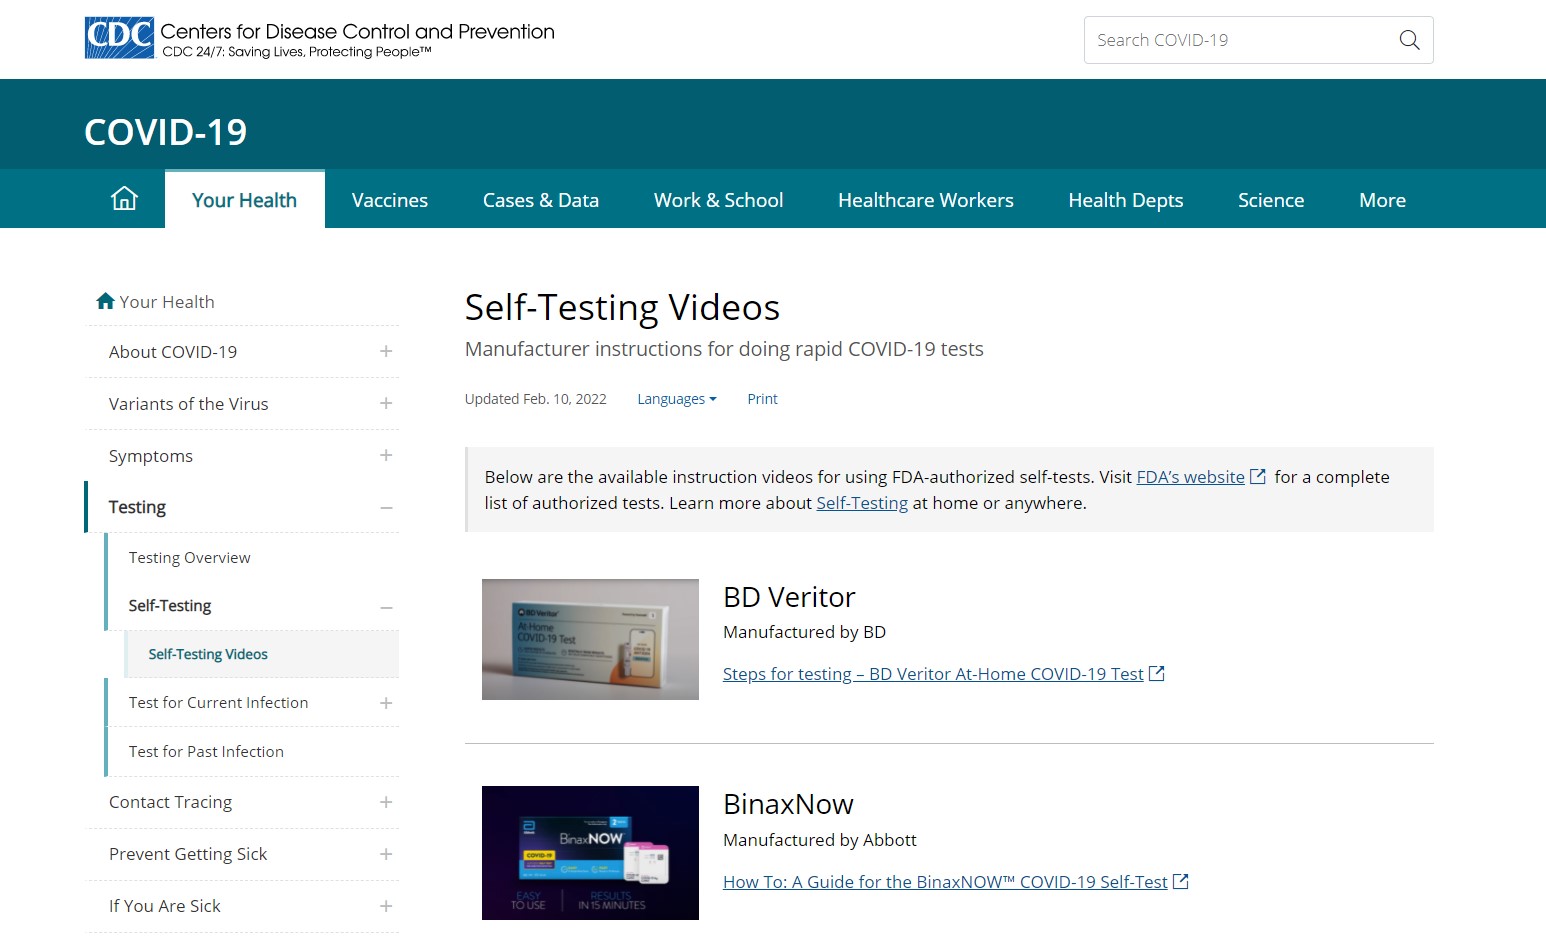 An image of the Centers for Disease Control COVID-19 webpage titled "Self-Testing Videos: Manufacturer instructions for doing rapid COVID-19 tests". Below the title are images of tests such as BD Veritor and BinaxNow with hyoerlinks to the instructional video.   